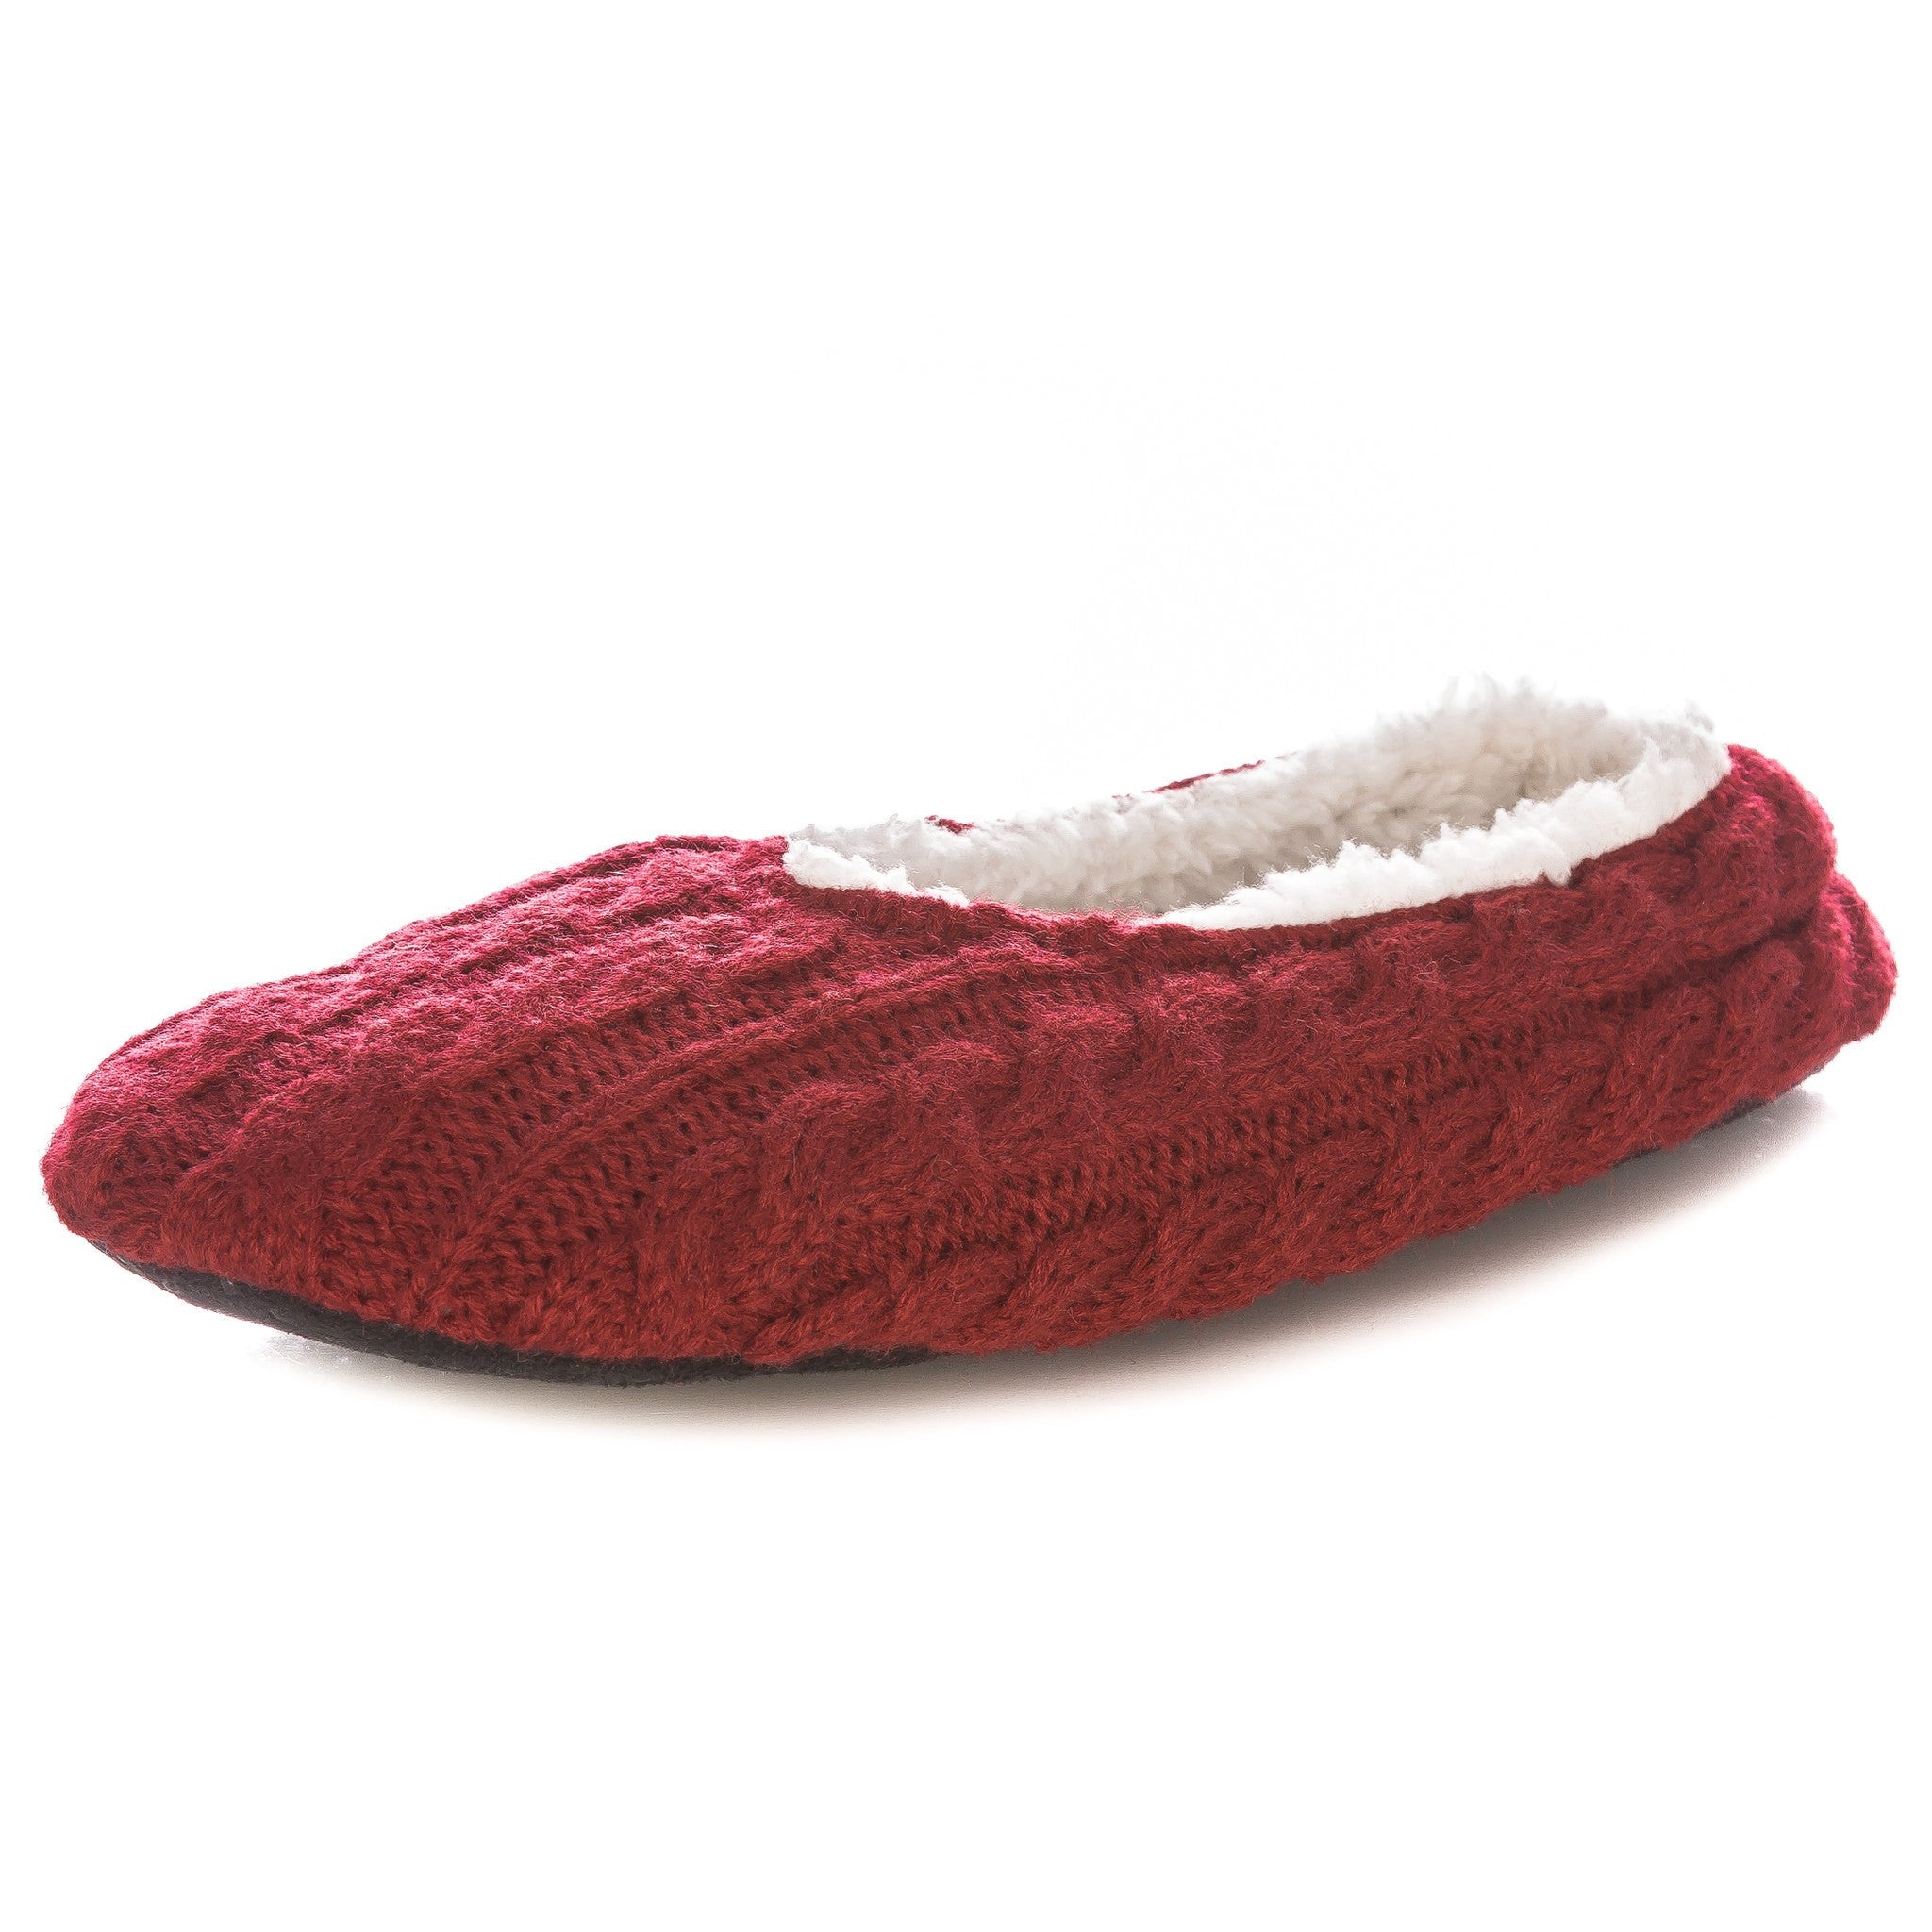 Women's Cable Knit Indoor Ballet Slippers